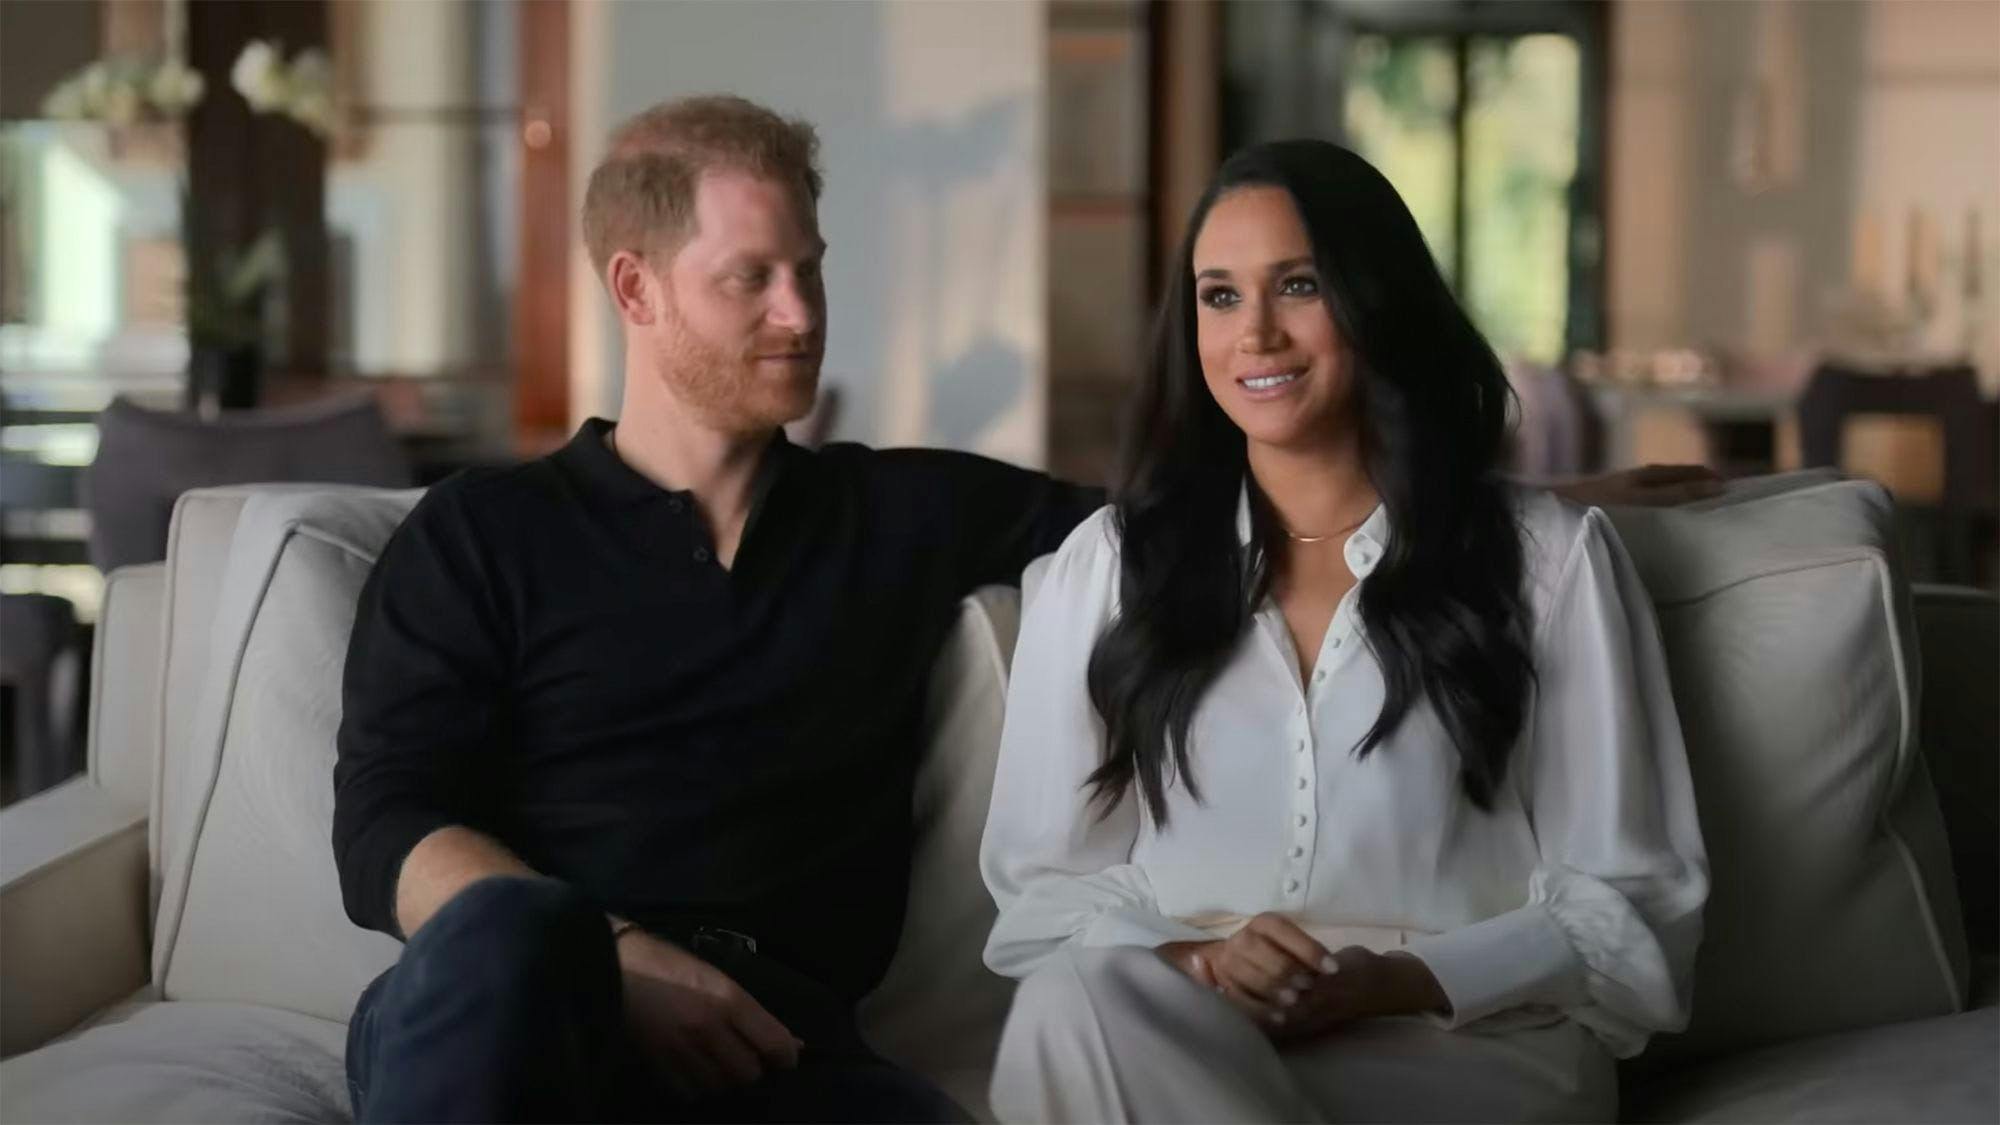 Prince Harry and Meghan Markle sitting on a couch